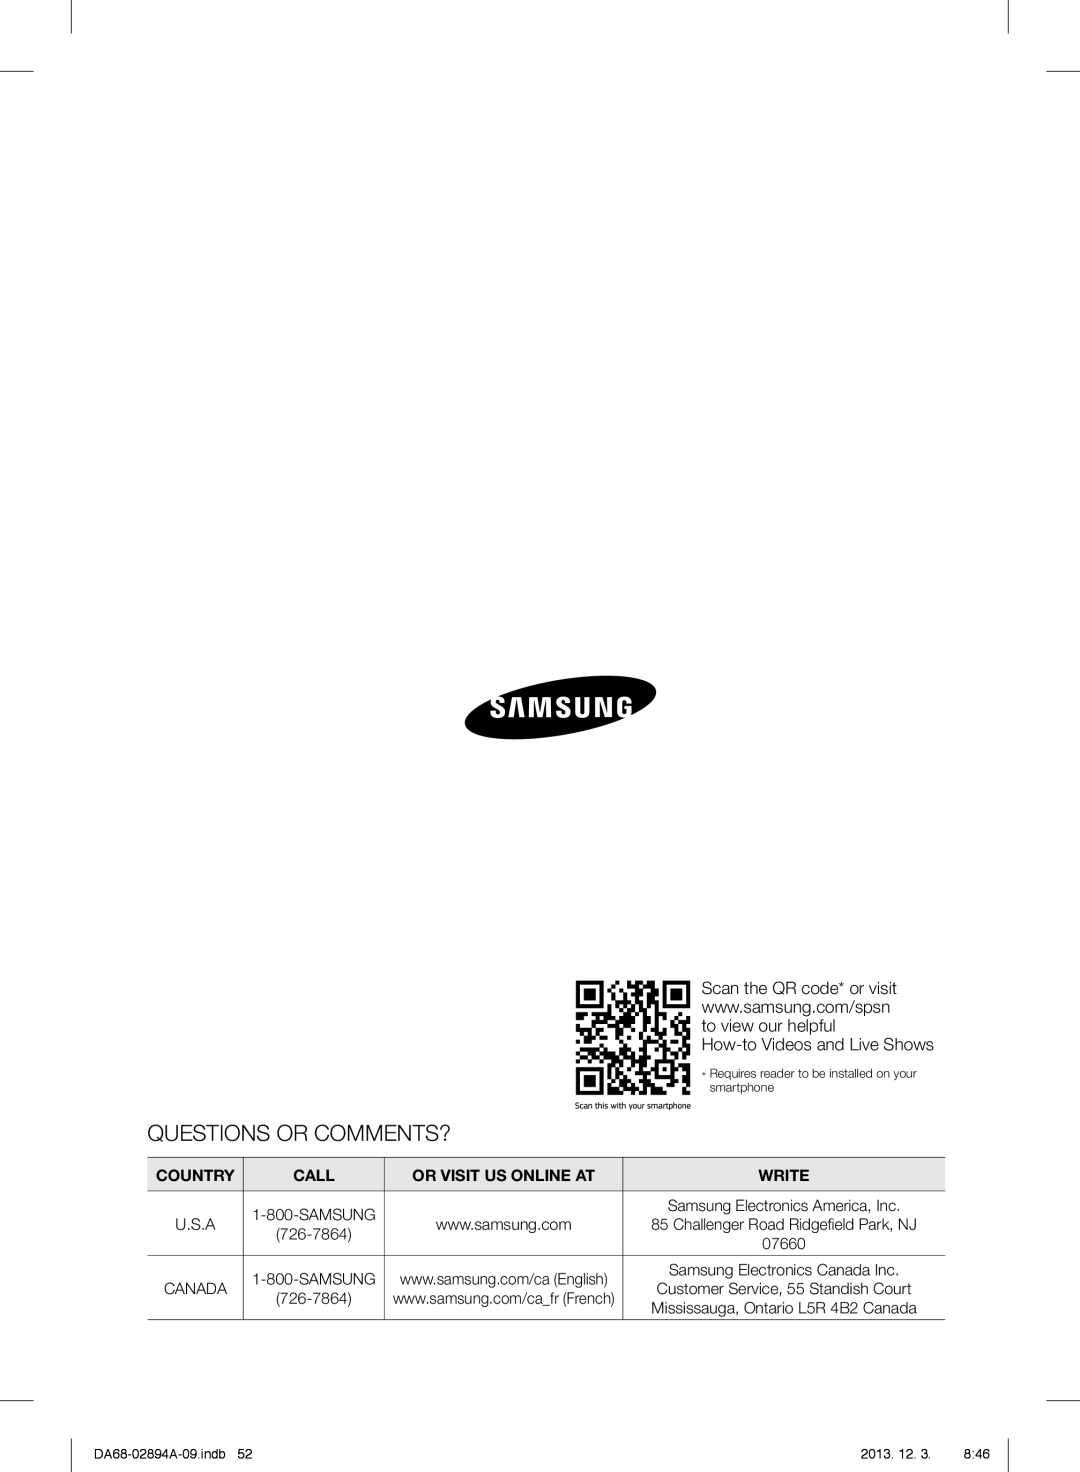 Samsung RF31FMESBSR Questions Or Comments?, Country, Call, Or Visit Us Online At, Write, DA68-02894A-09.indb, 2013. 12. 3 